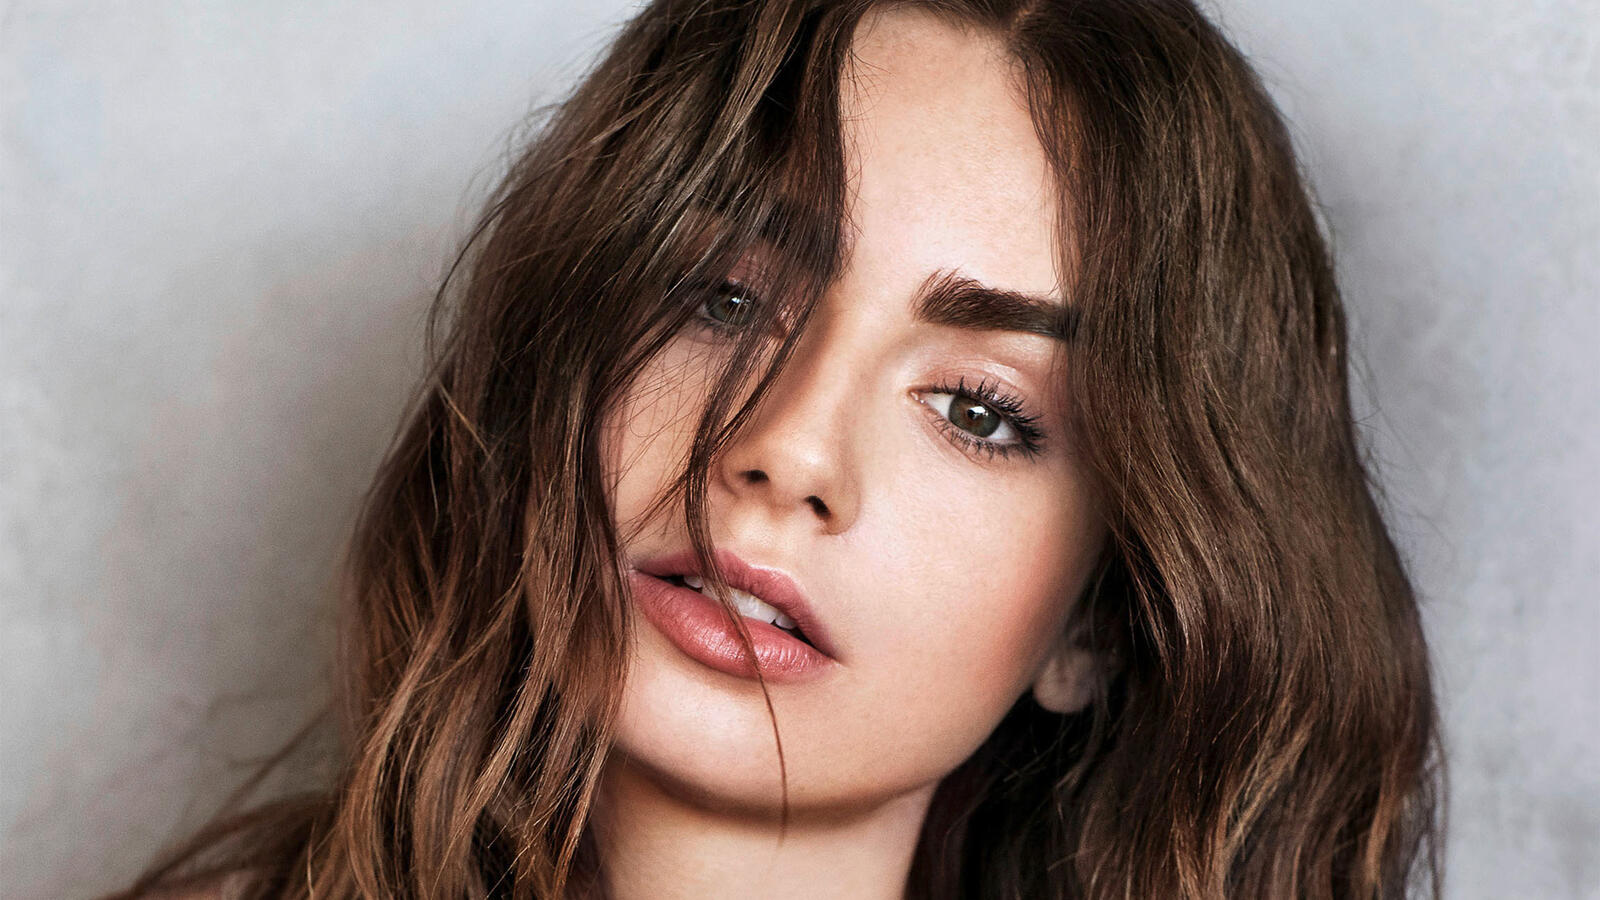 Wallpapers Lily Collins girls celebrity on the desktop